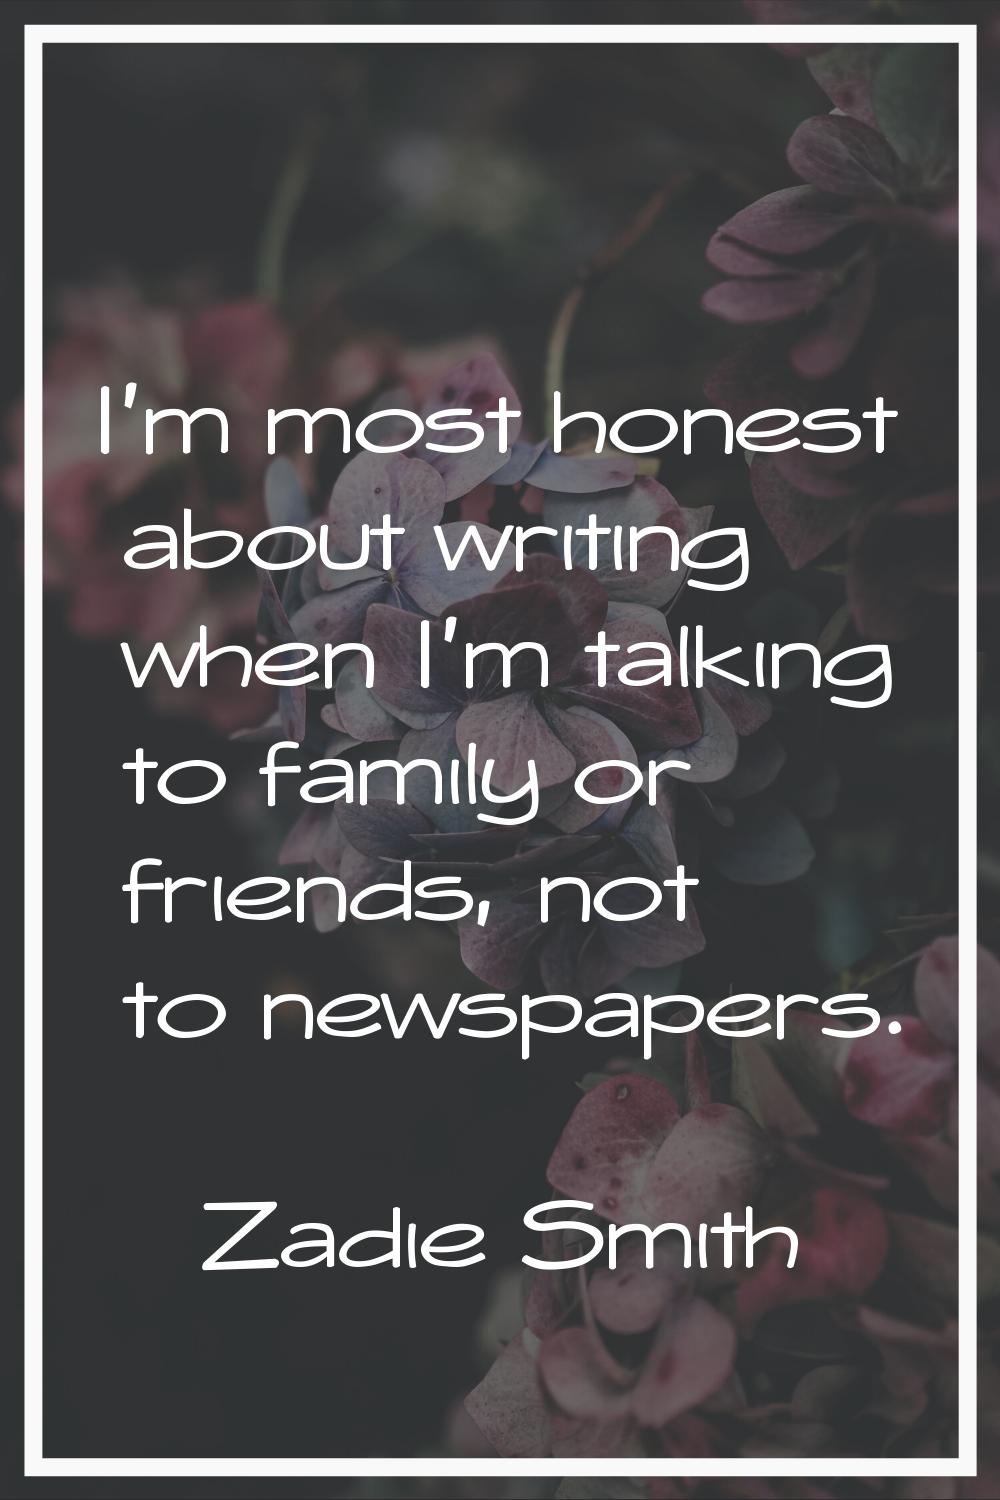 I'm most honest about writing when I'm talking to family or friends, not to newspapers.